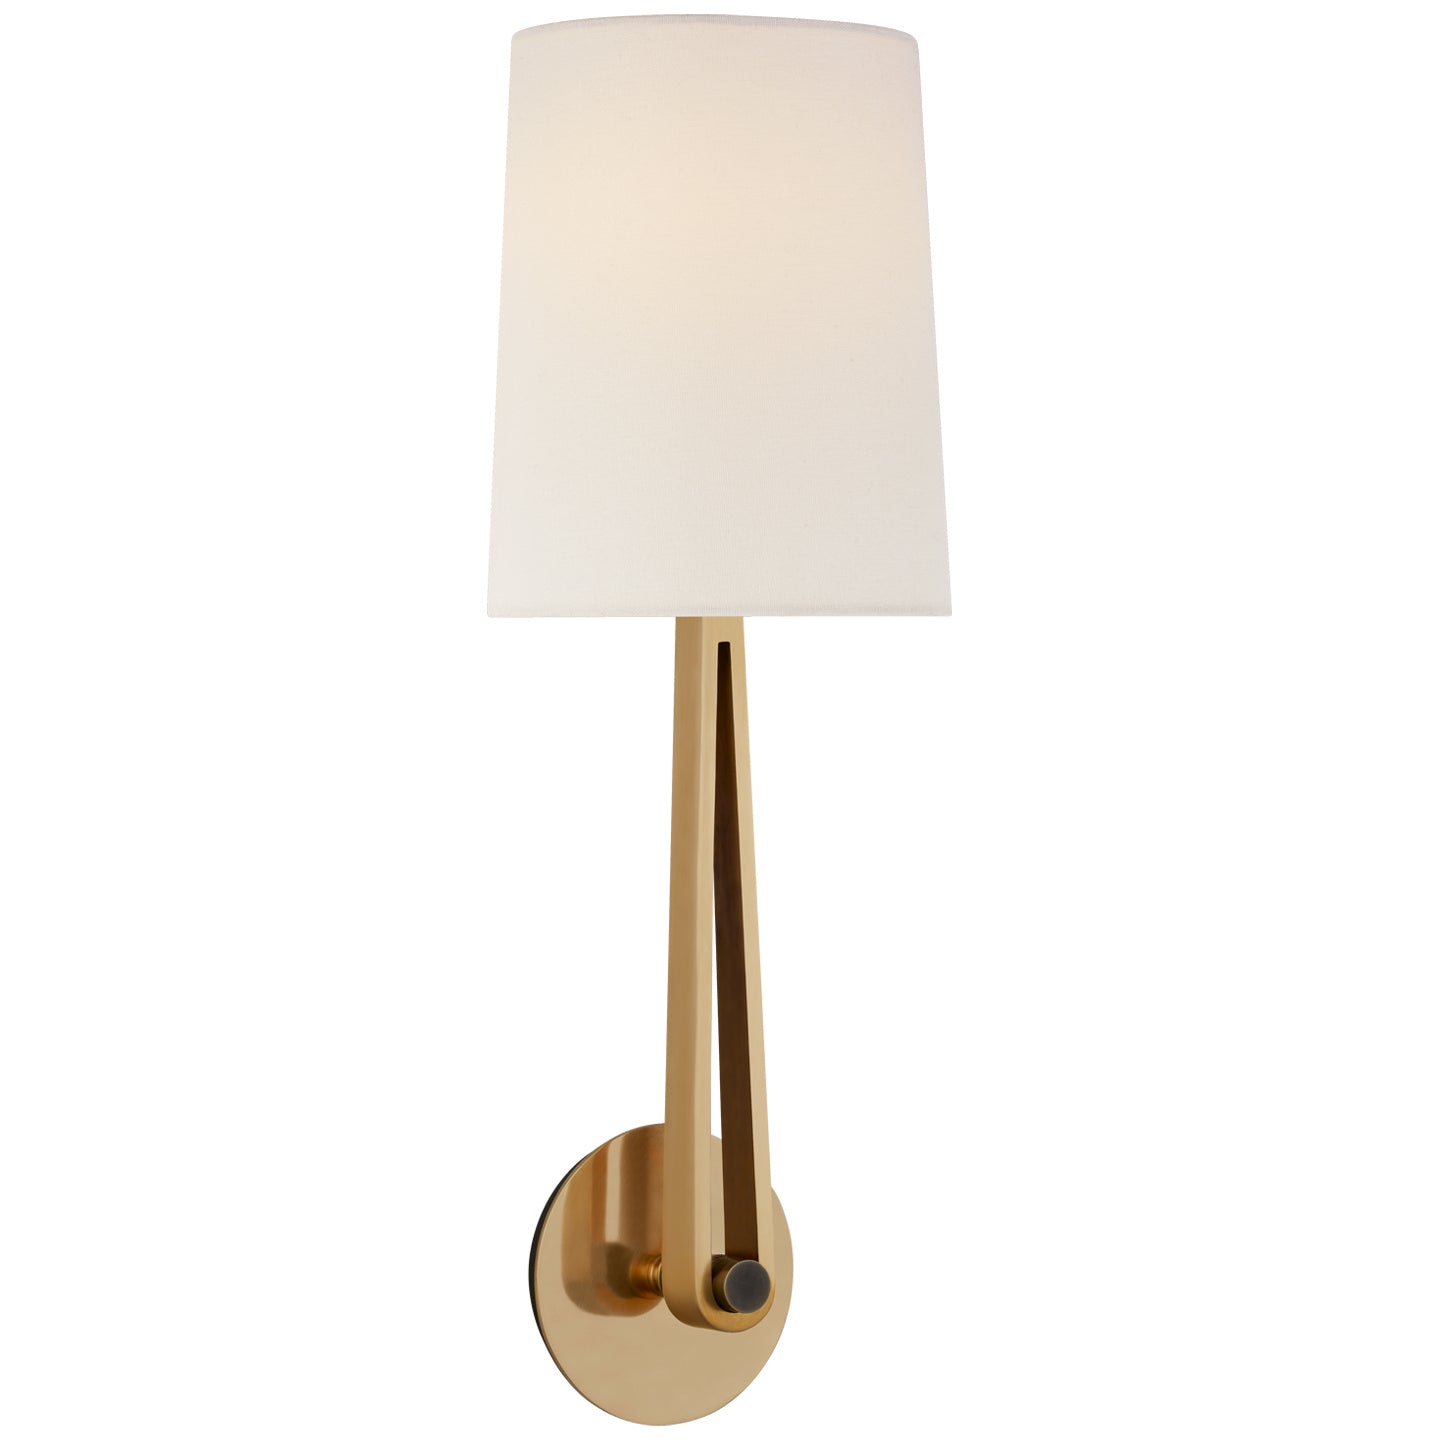 Load image into Gallery viewer, Visual Comfort Signature - TOB 2512HAB/BZ-L - Two Light Wall Sconce - Alpha - Hand-Rubbed Antique Brass and Bronze
